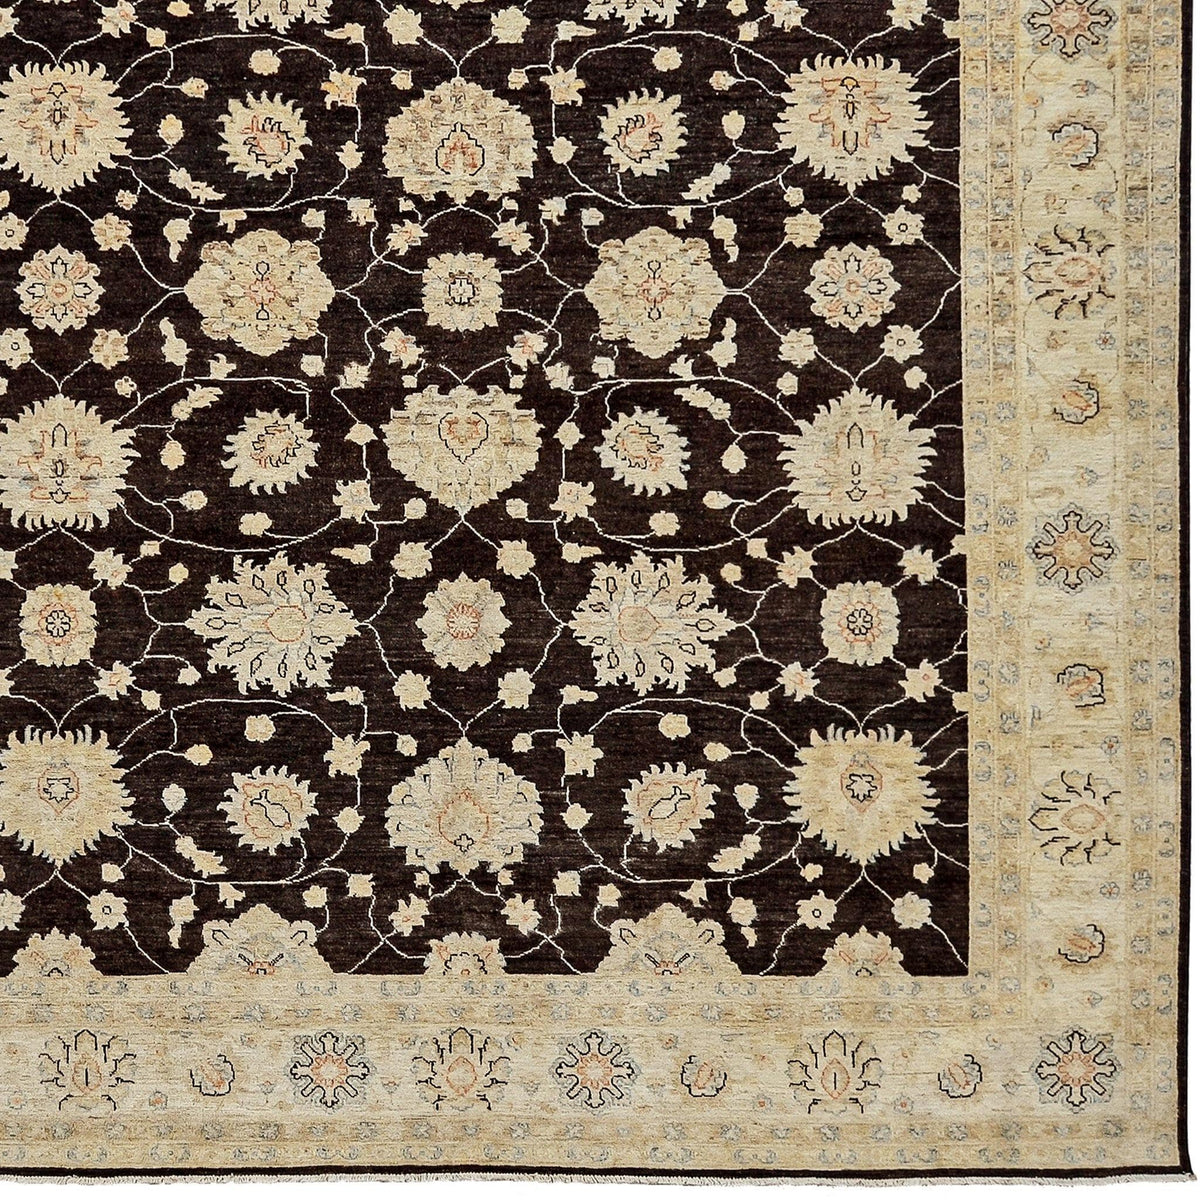 Fine Hand-knotted Transitional Wool Rug 244cm x 319cm